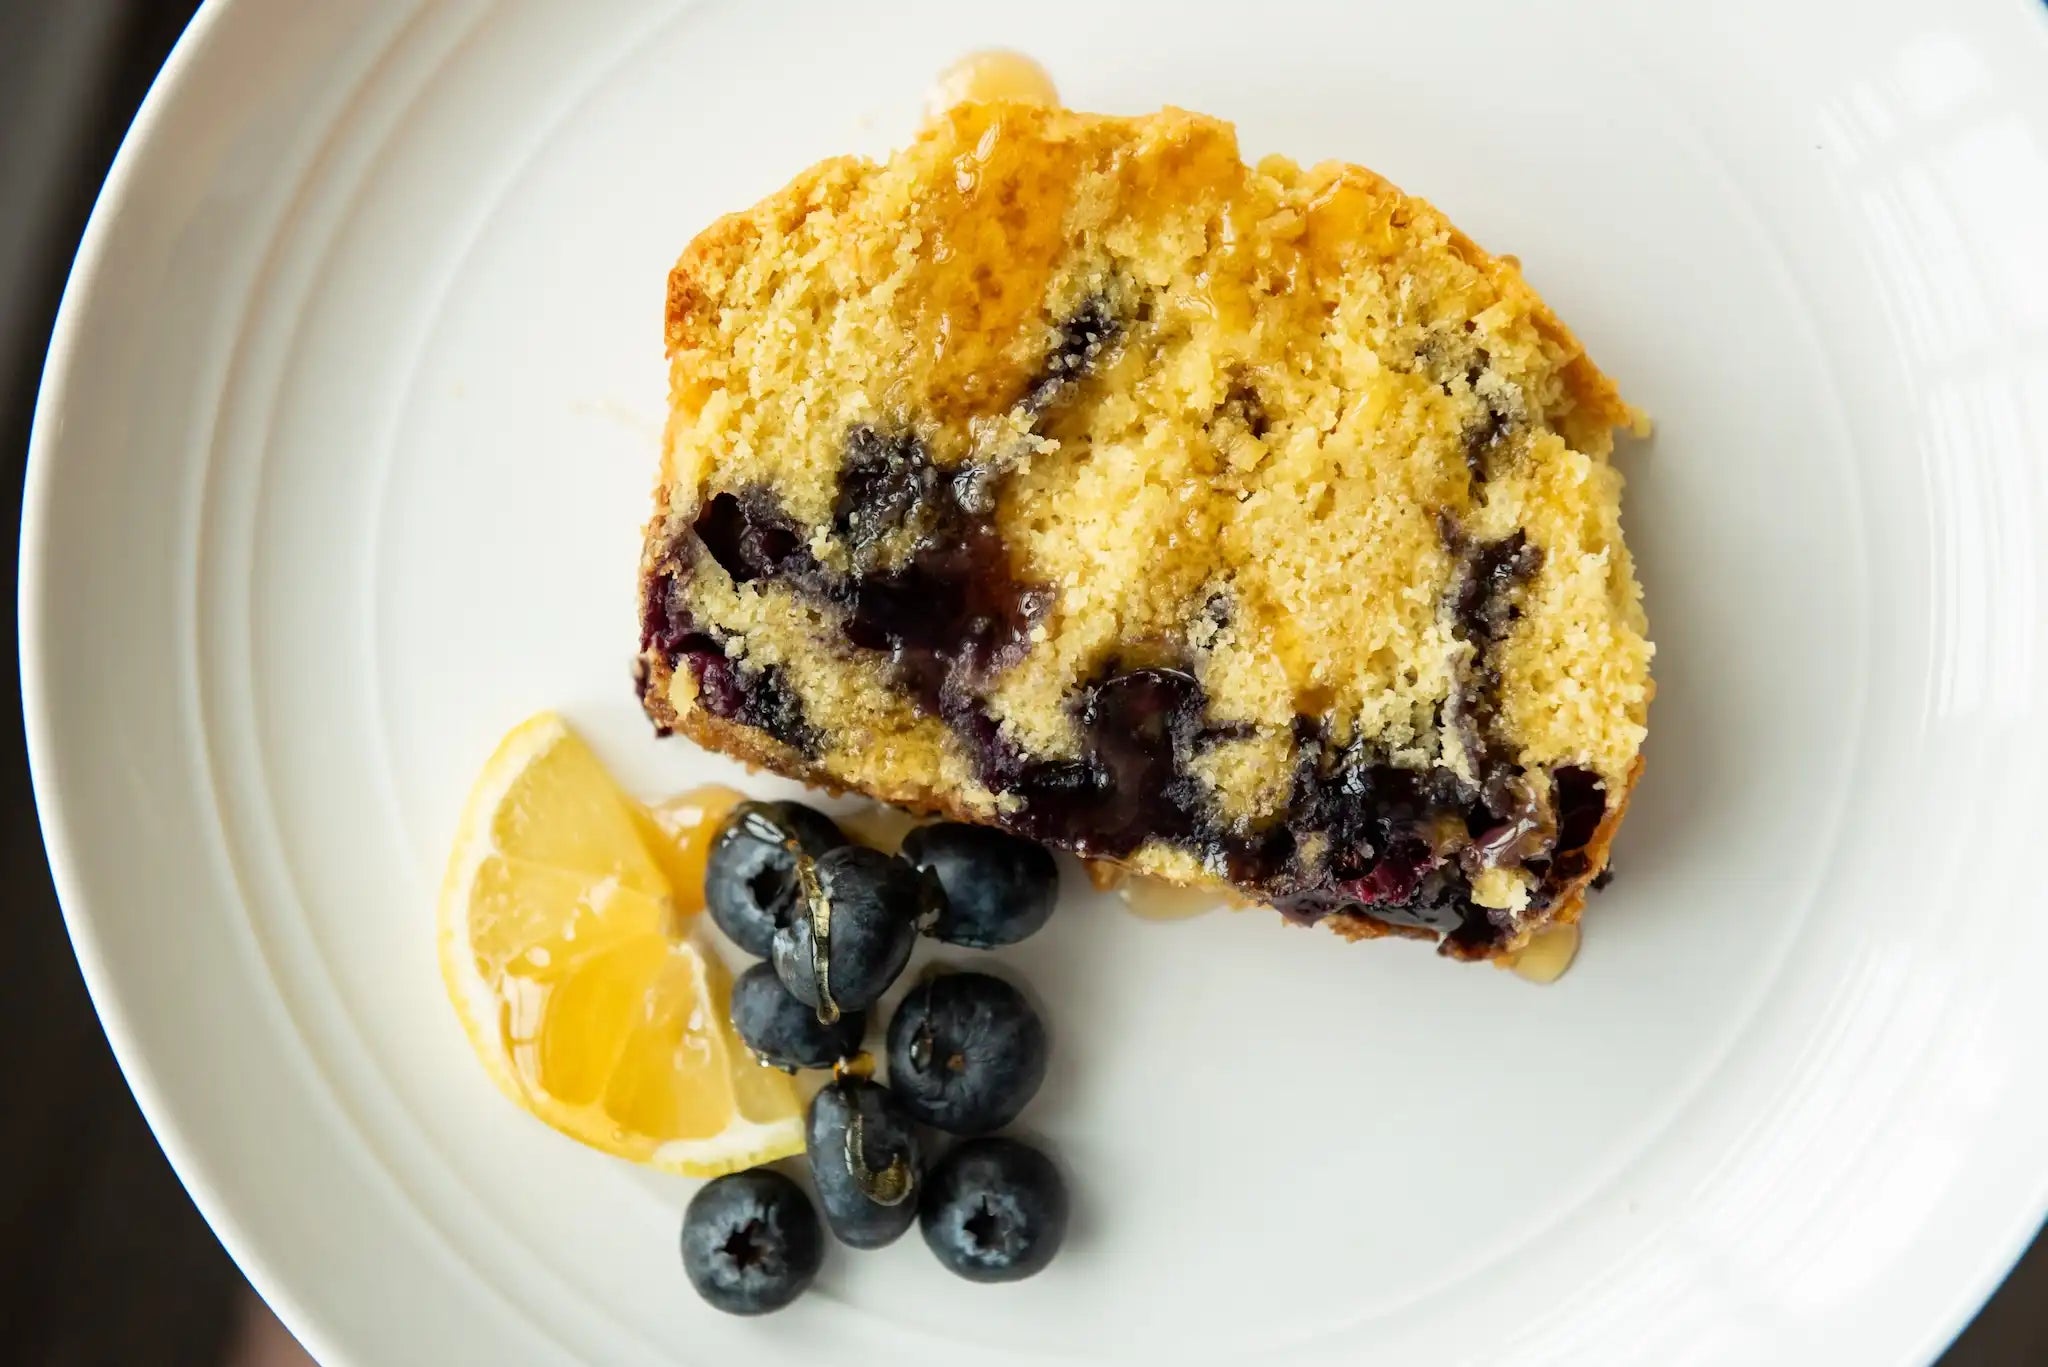 slice of blueberry ginger lemon tea bread on a white plate with blueberries and a lemon slice, all drizzled with honey